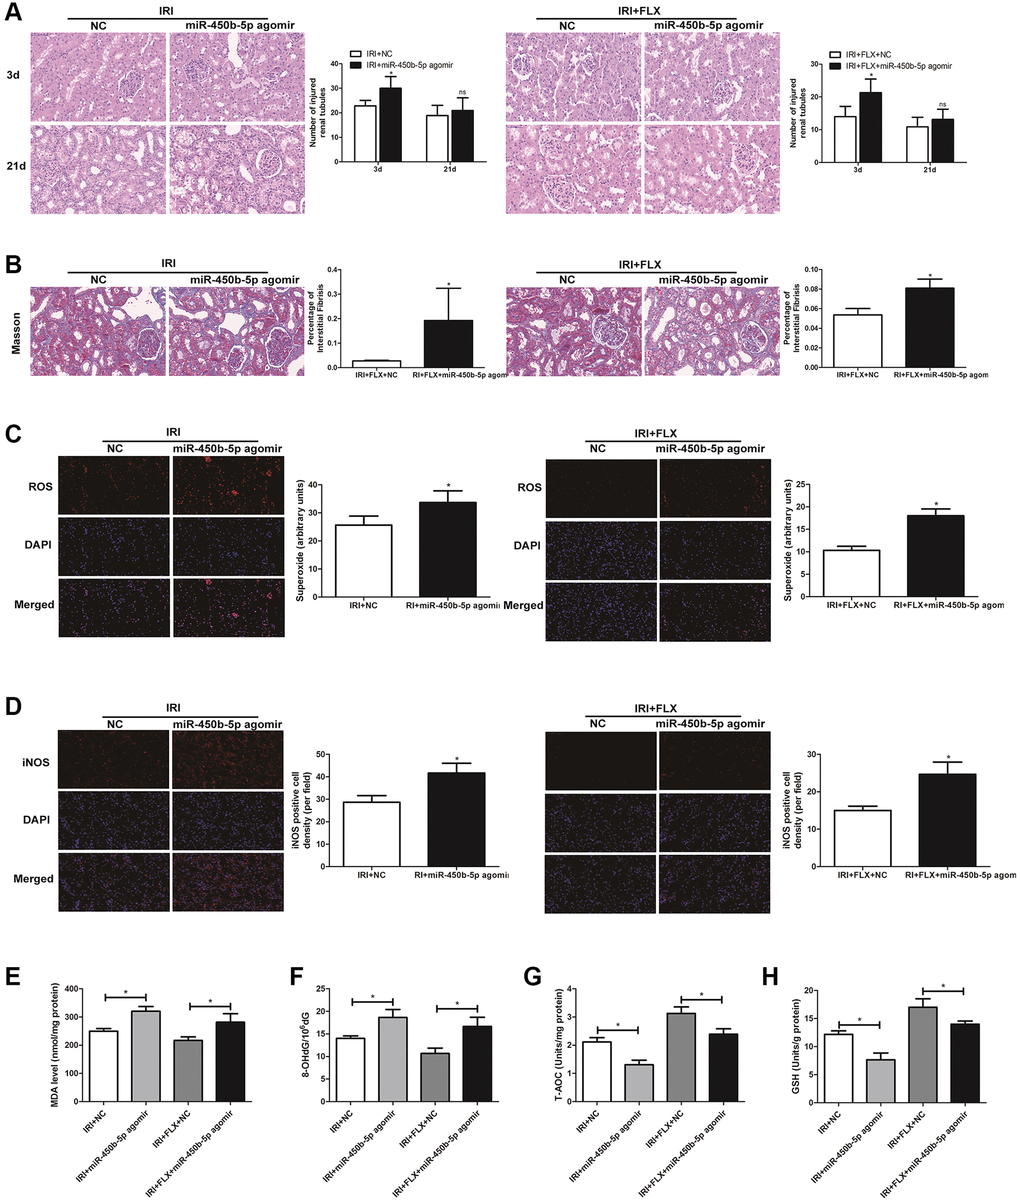 Up-regulation of miR-450b-5p aggravated oxidative stress in renal IRI-treated rats. (A) H&E staining of renal tissues in IRI group and IRI+FLX group after the injection of NC agomir and miR-450b-5p agomir at 3 and 21 days after operation in male rats (magnification ×400). (B) Masson staining was used to evaluate renal injury and fibrosis in IRI group and IRI+FLX group after the injection of NC agomir and miR-450b-5p agomir at 21 days after operation in male rats (magnification ×400). (C) DHE staining of renal tissues in IRI group and IRI+FLX group after the injection of NC agomir and miR-450b-5p agomir. ROS exhibit red fluorescence under fluorescent microscope (magnification ×400). (D) Immunohistochemical analysis showed the expression level of iNOS from renal tissues in IRI group and IRI+FLX group after the injection of NC agomir and miR-450b-5p agomir in male rats (magnification ×400). (E–H) Content of MDA, 8-OHdG, T-AOC, and GSH of renal ischemia tissues in each group. Data were presented as Mean ± SD, *significant difference (P **P 0.01).